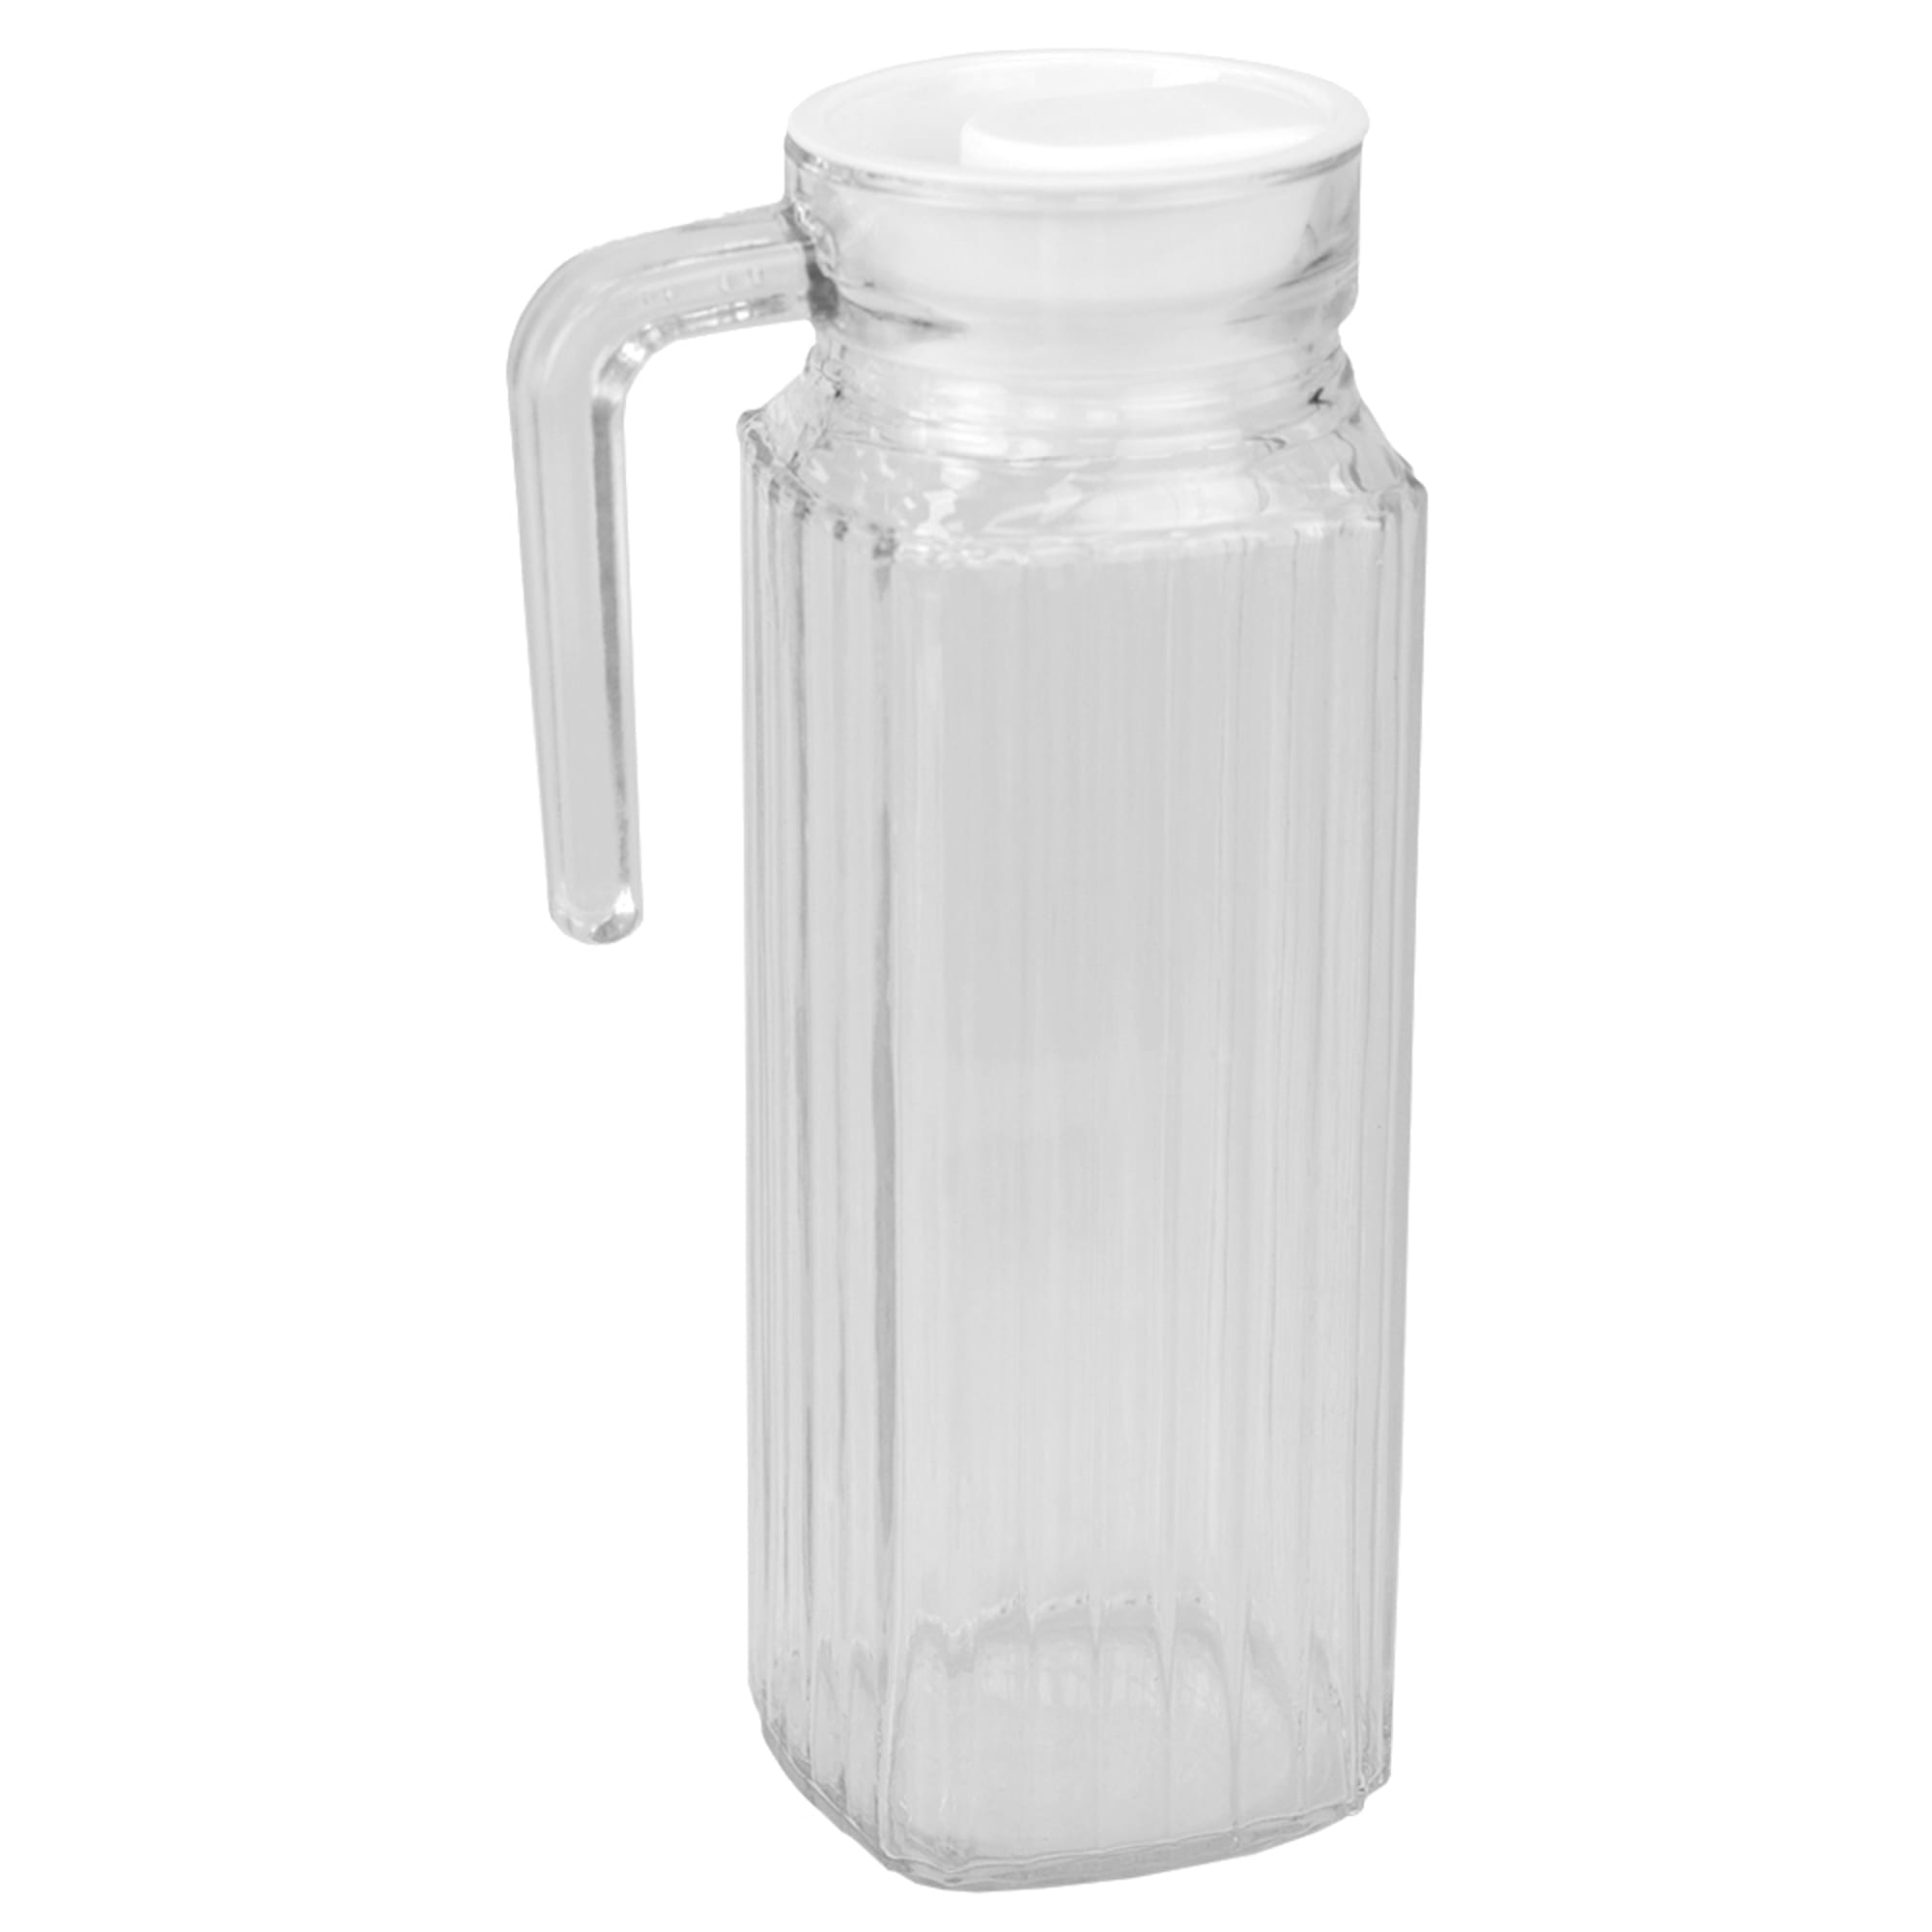 Home Basics Embellished Glass 1 Lt Decorative Beverage Pitcher with No-Mess Pouring Spout and Solid Grip Handle, Clear $4.00 EACH, CASE PACK OF 12